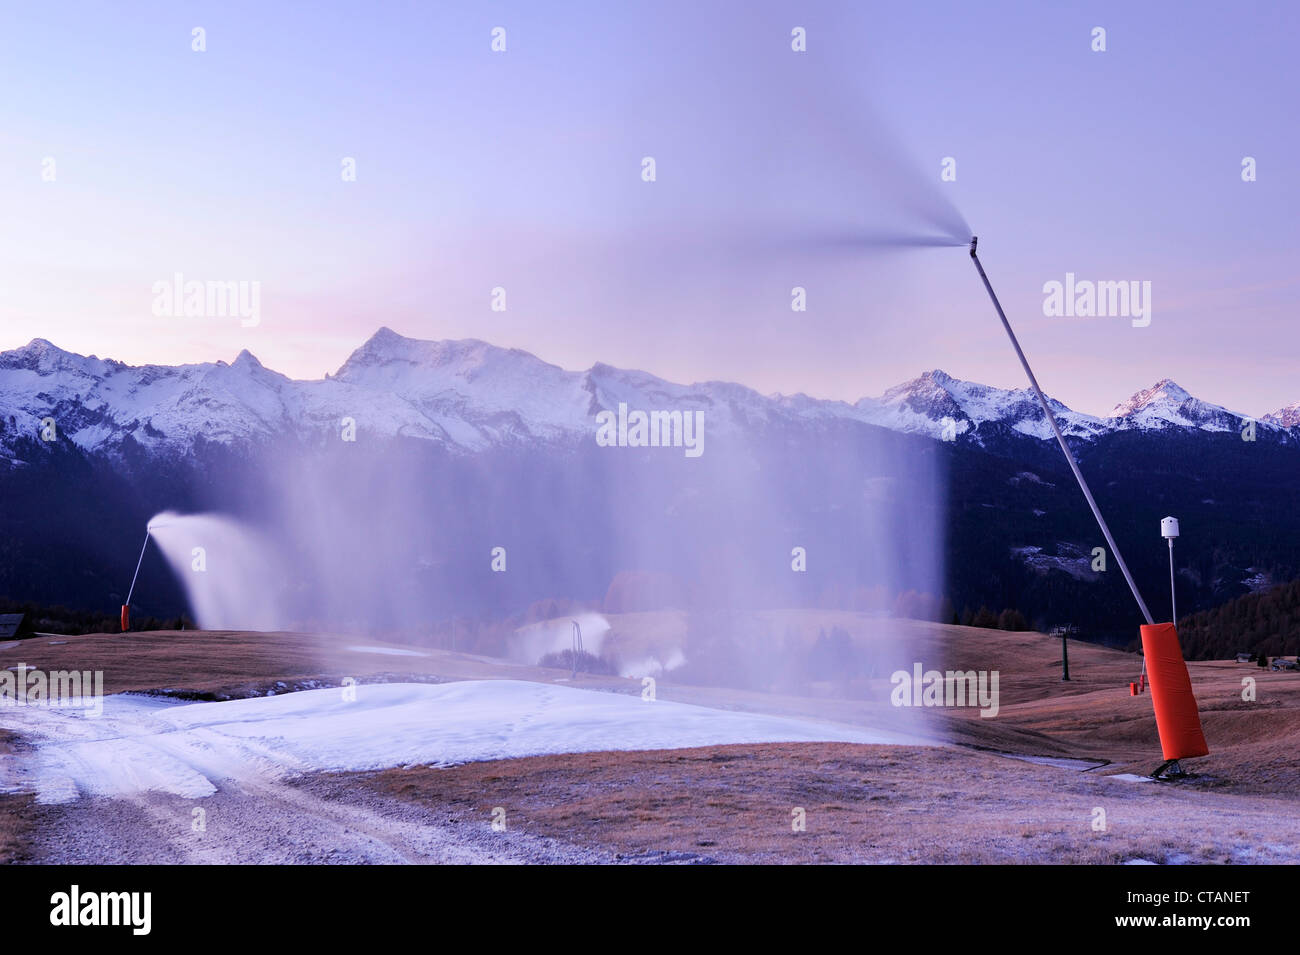 Snow cannons blowing artificial snow on slope, Lagorai range in background, valley of Fiemme, Dolomites, UNESCO World Heritage S Stock Photo